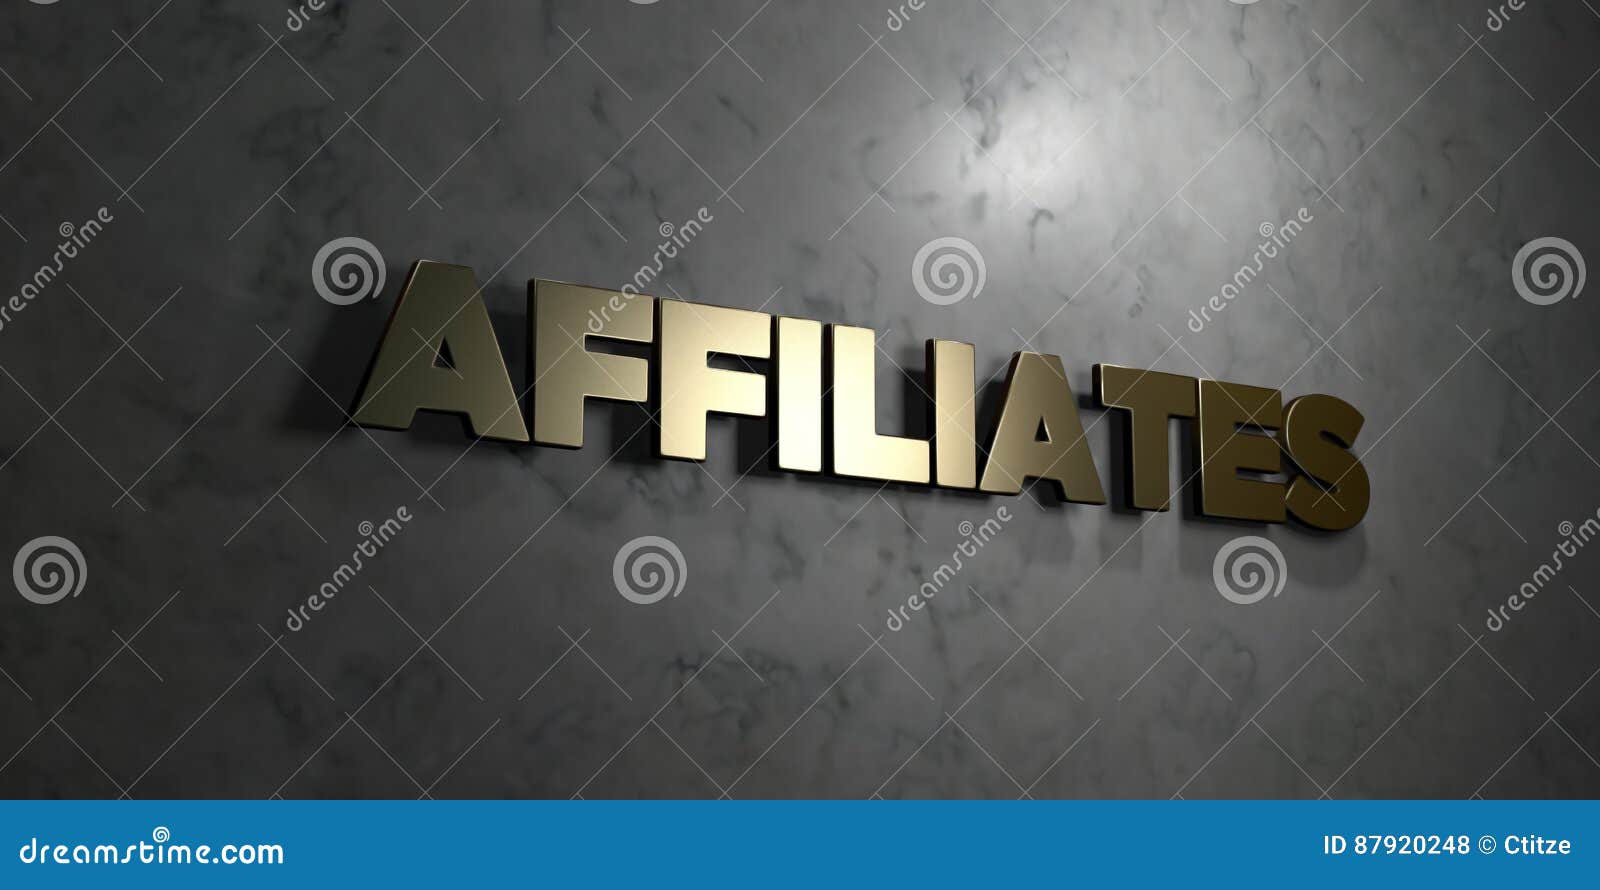 affiliates - gold text on black background - 3d rendered royalty free stock picture